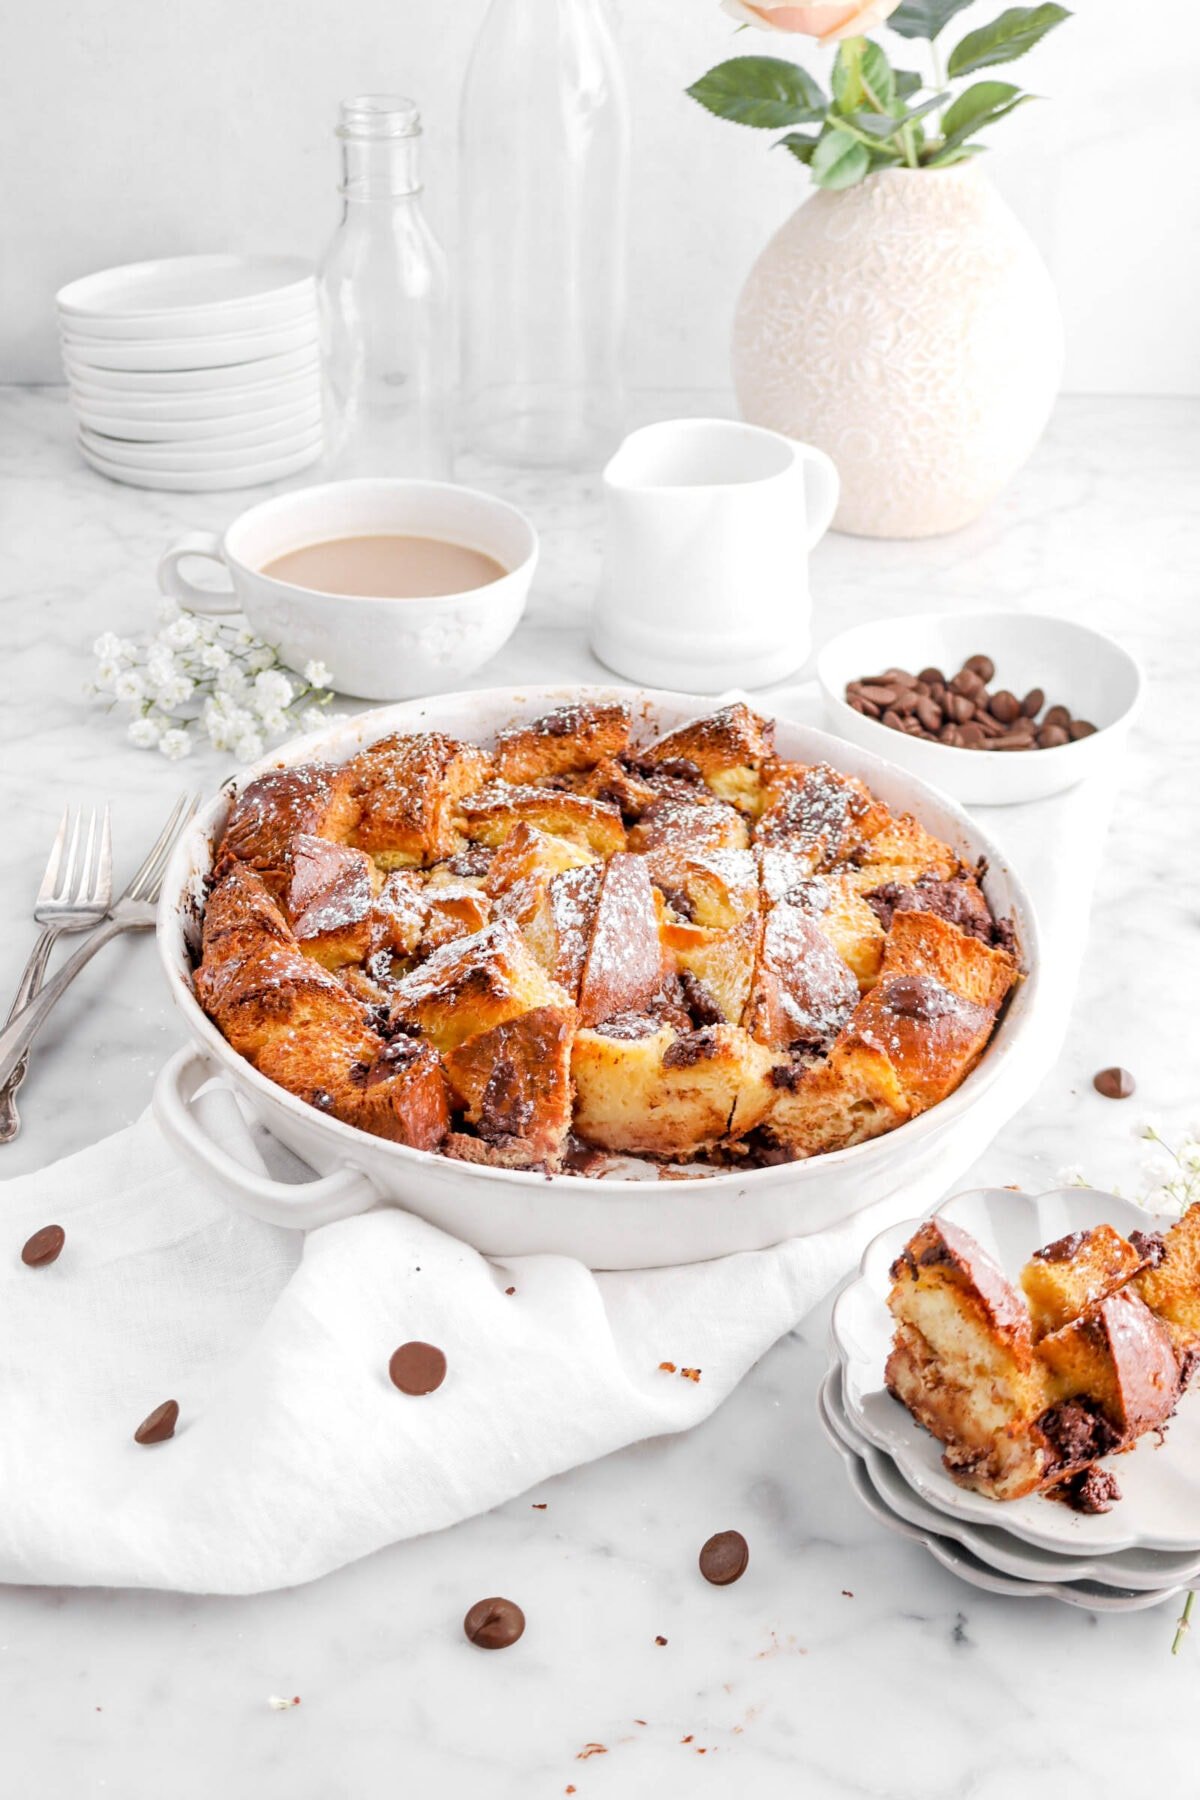 angled shot of bread pudding with slice missing, with chocolate chips and flowers around